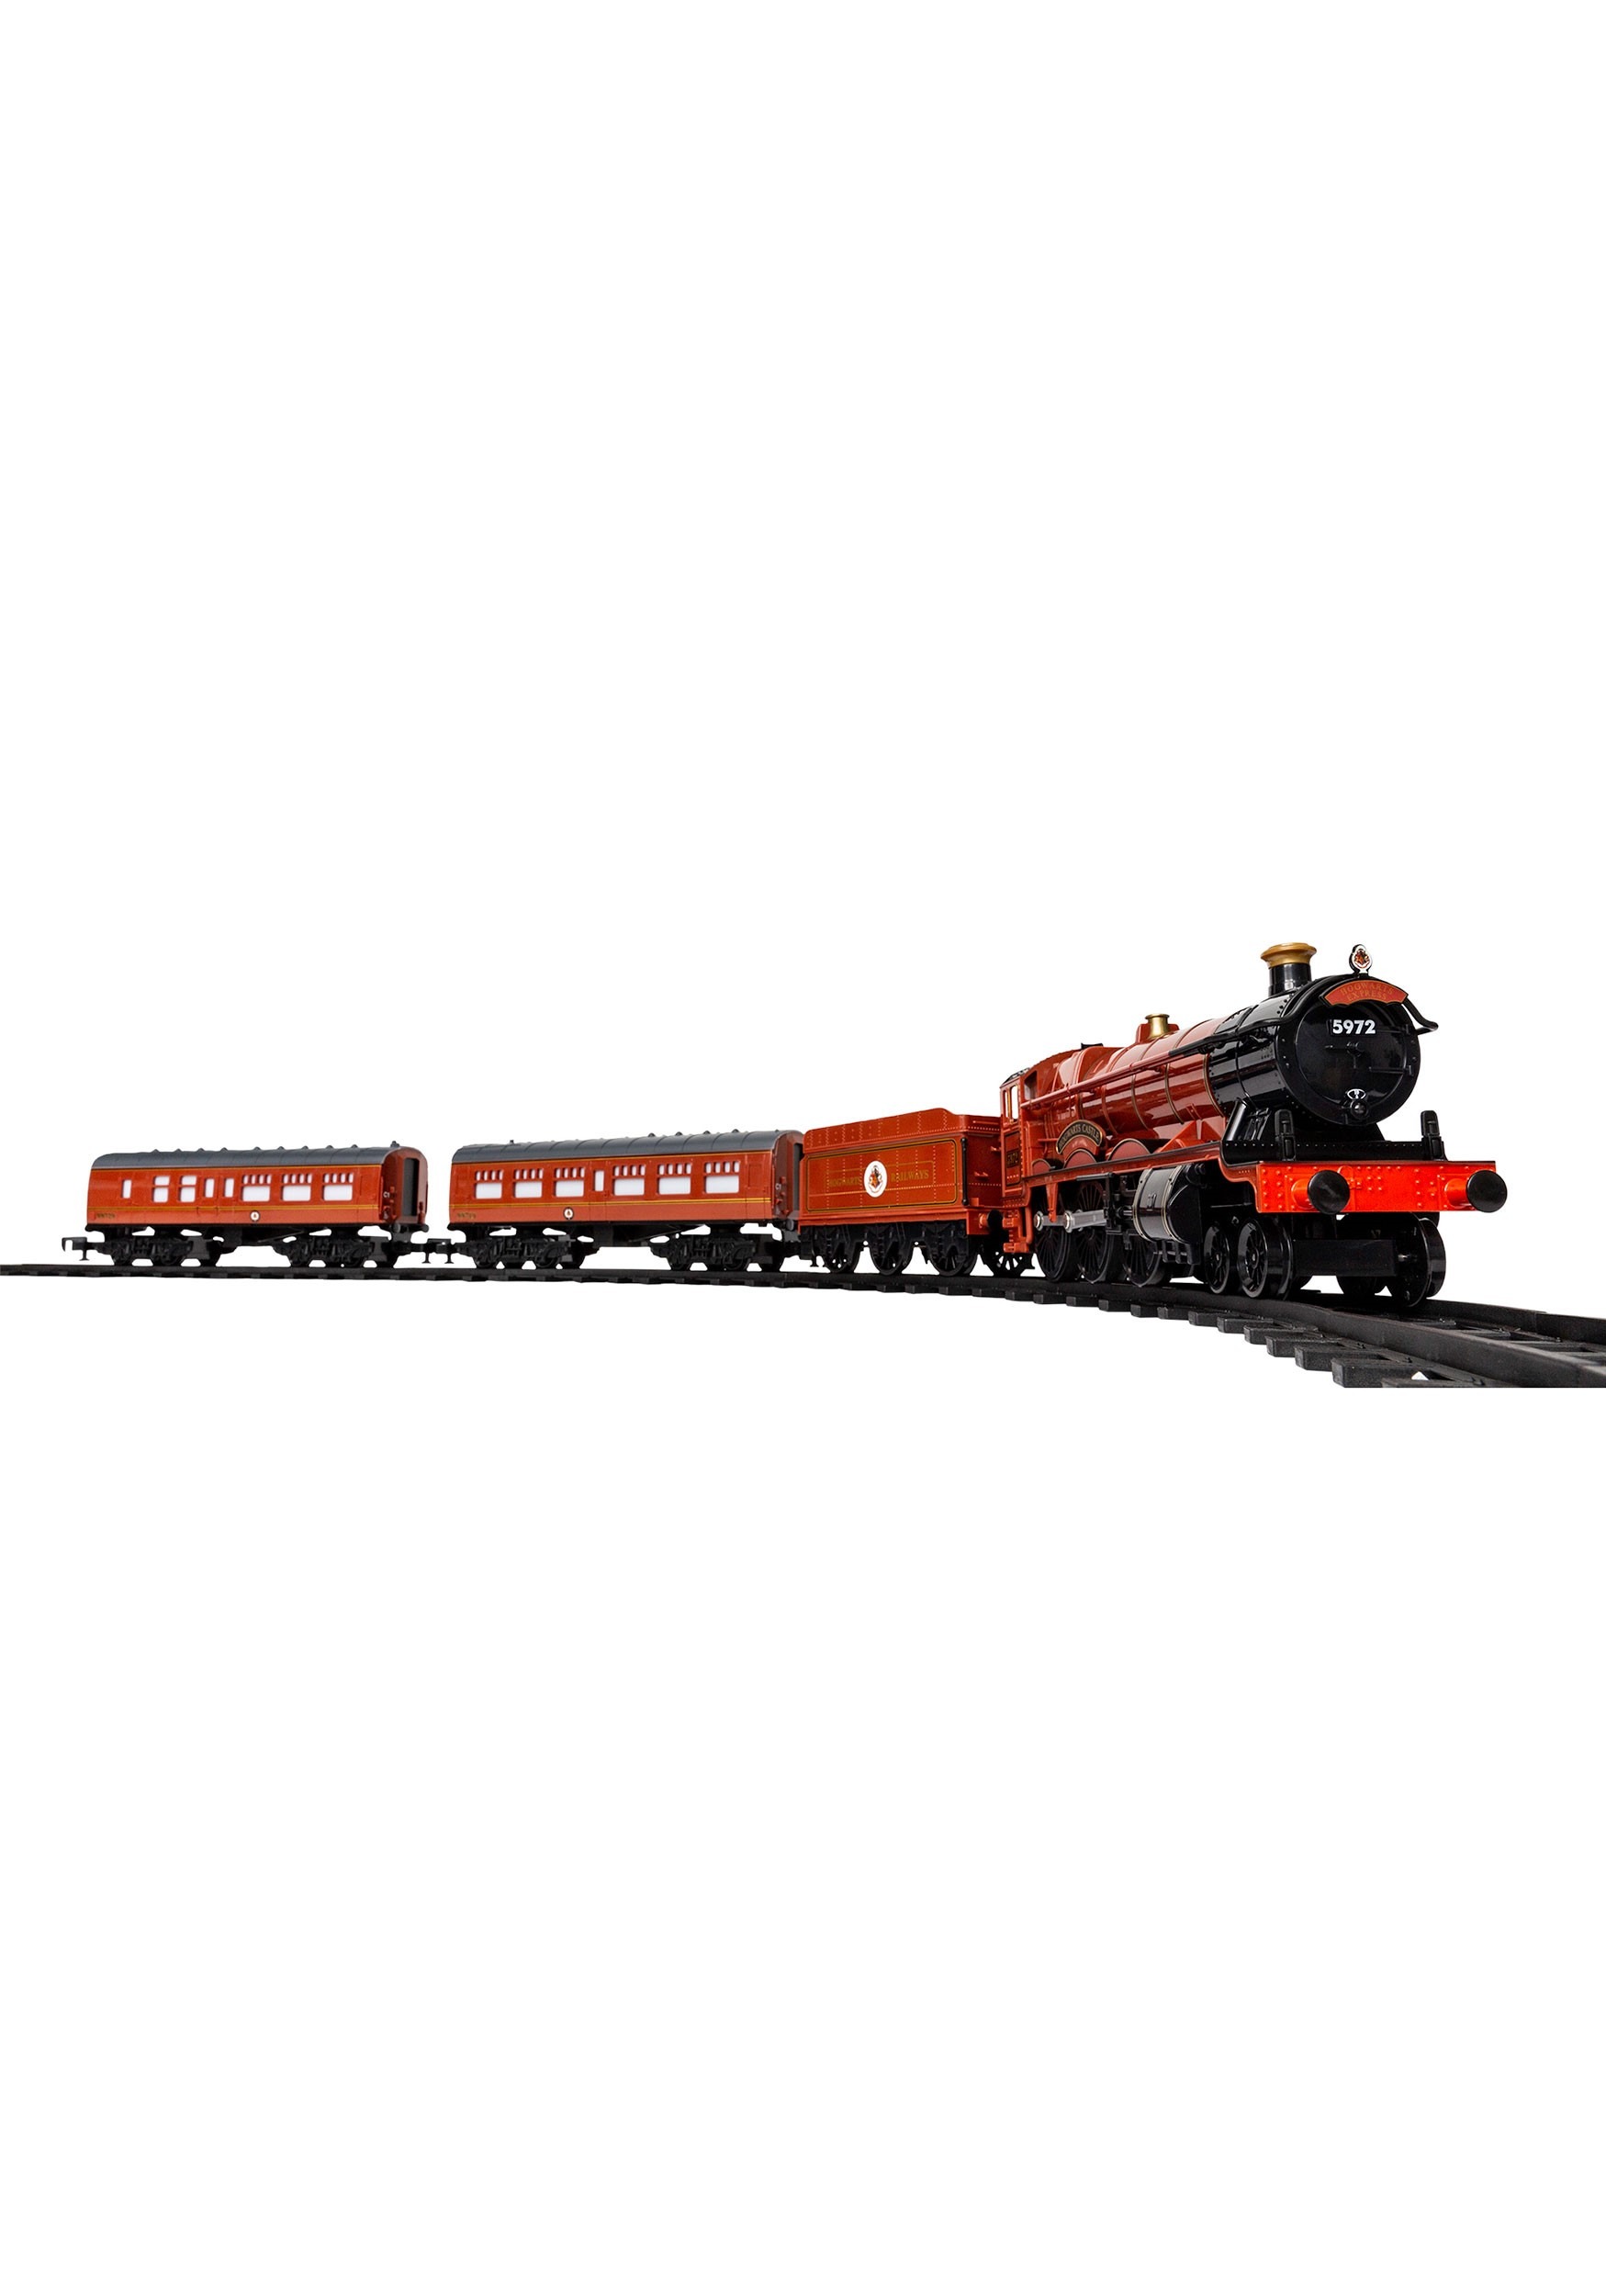 Hogwarts Express Ready-to-Play Lionel Train Set